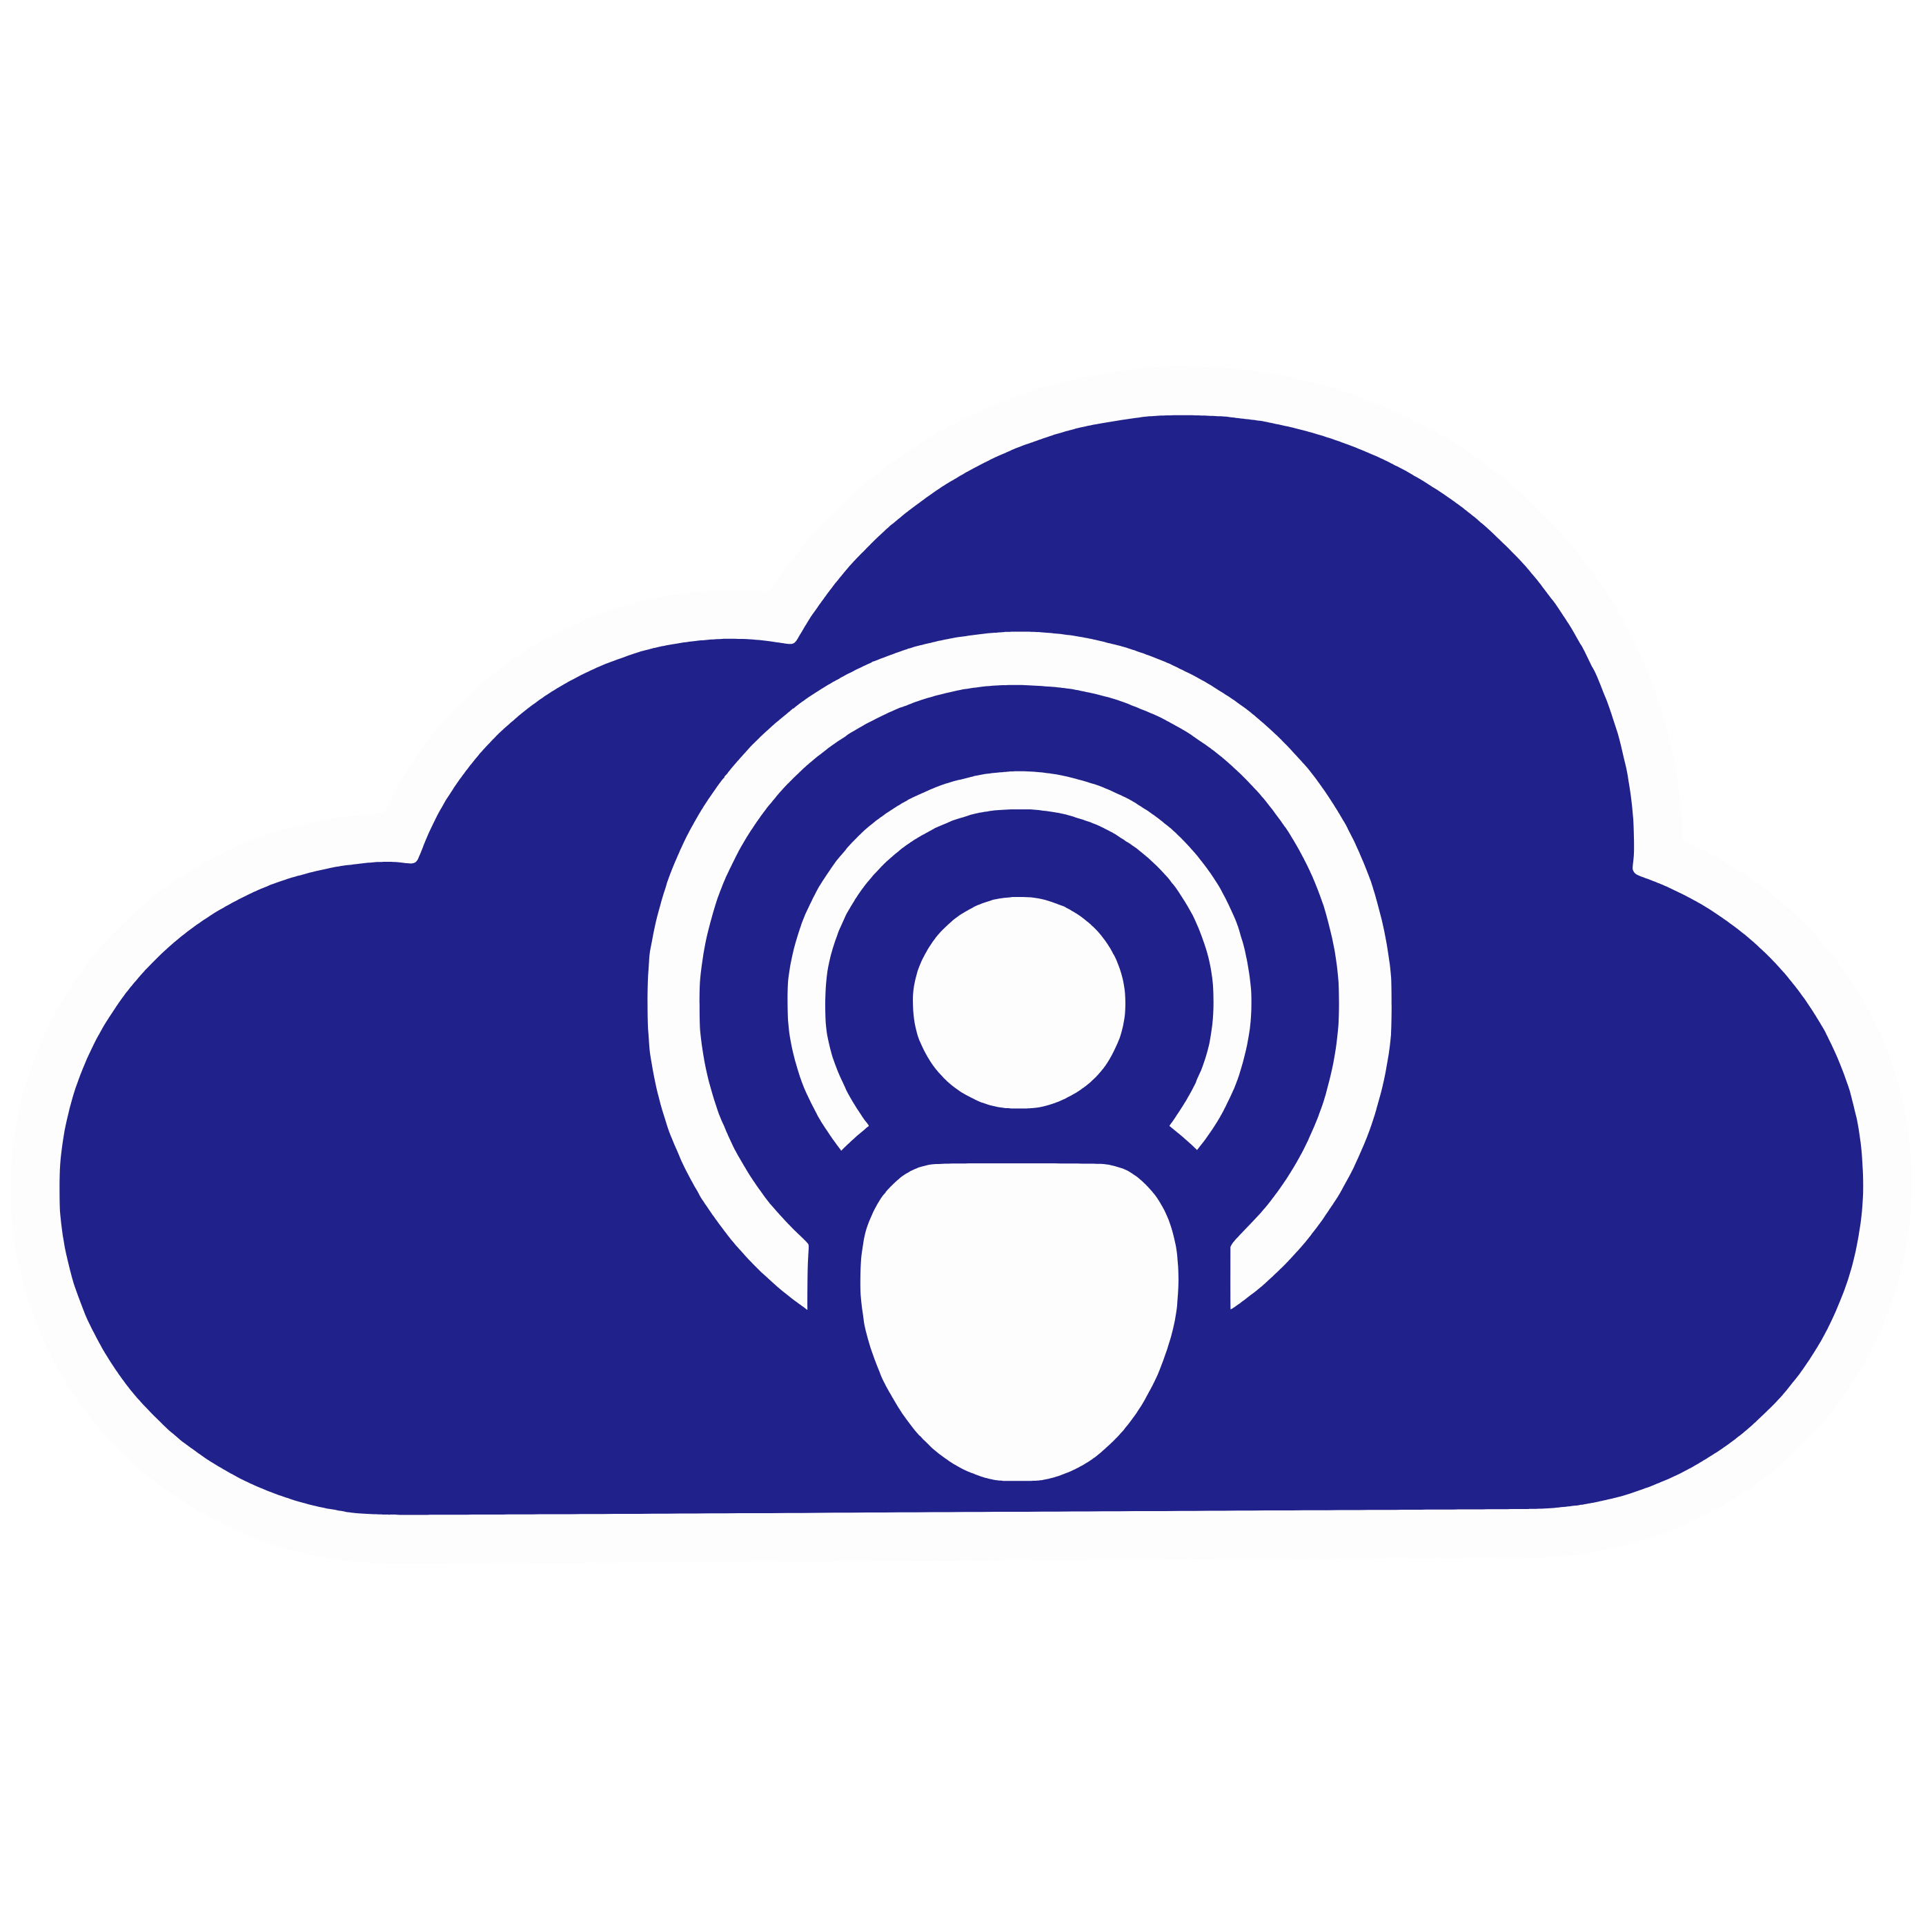 Aide podCloud